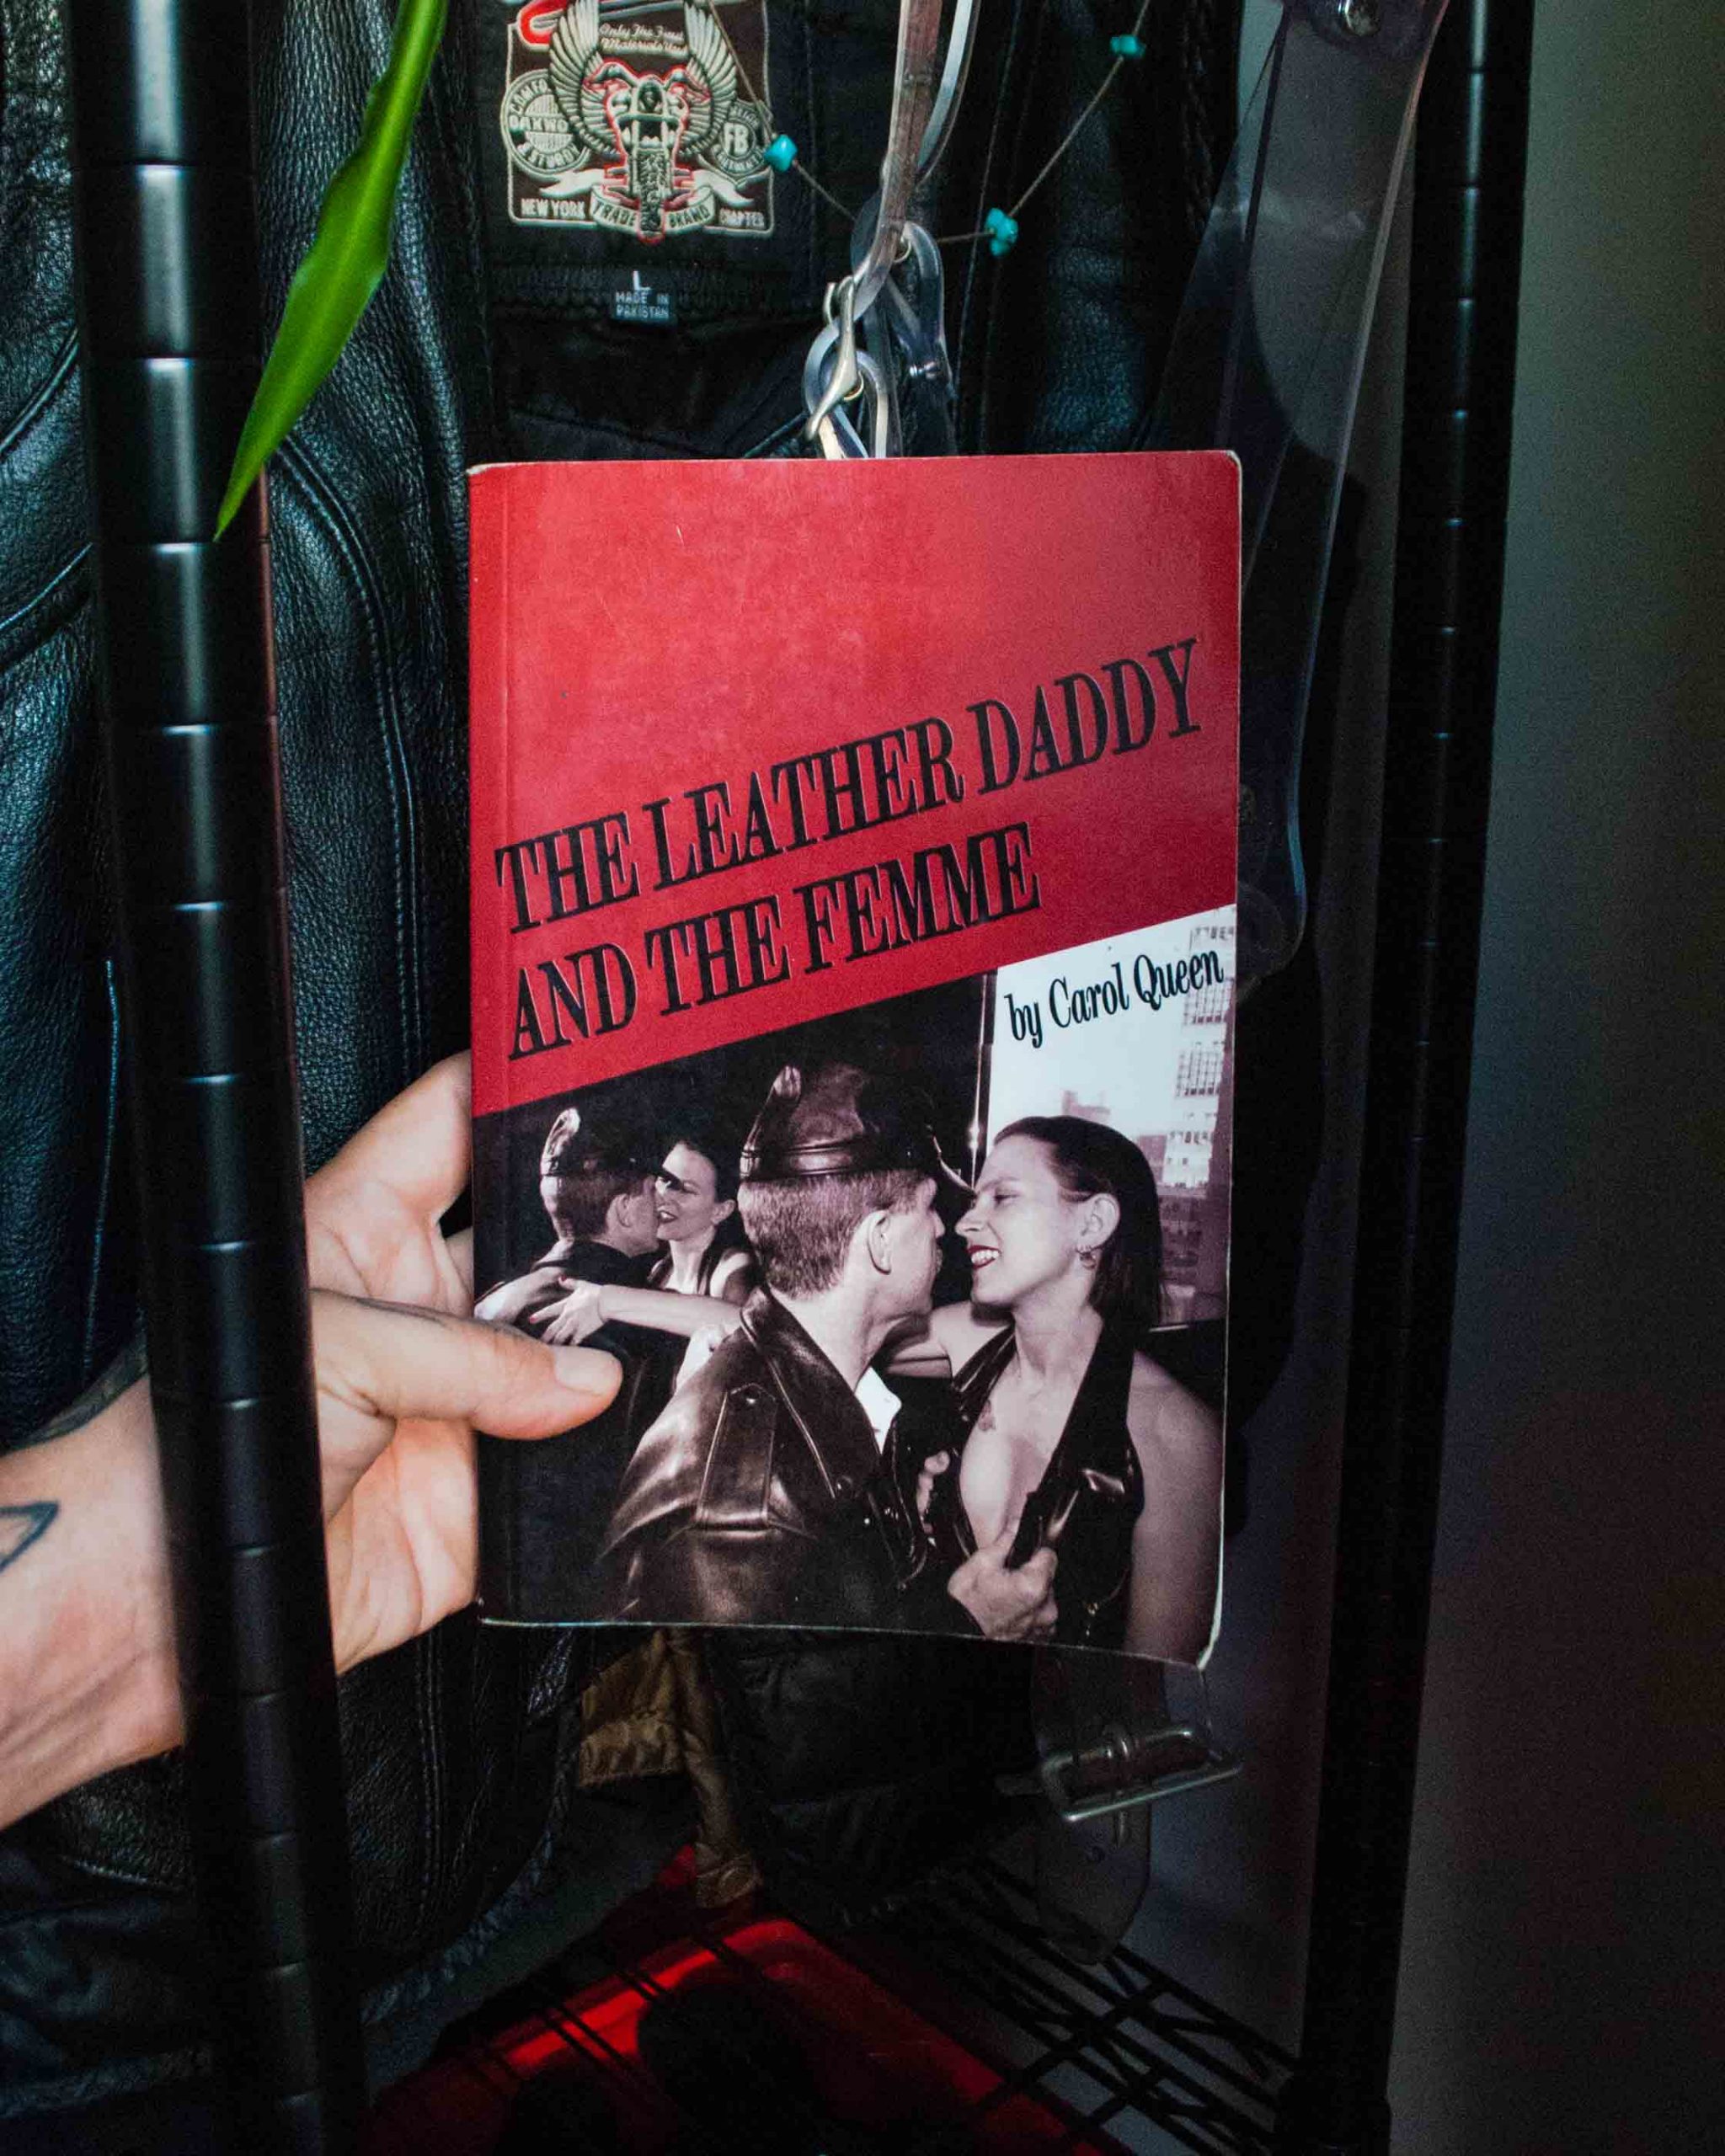 Monk Reviews The Leather Daddy and The Femme by Carol Queen